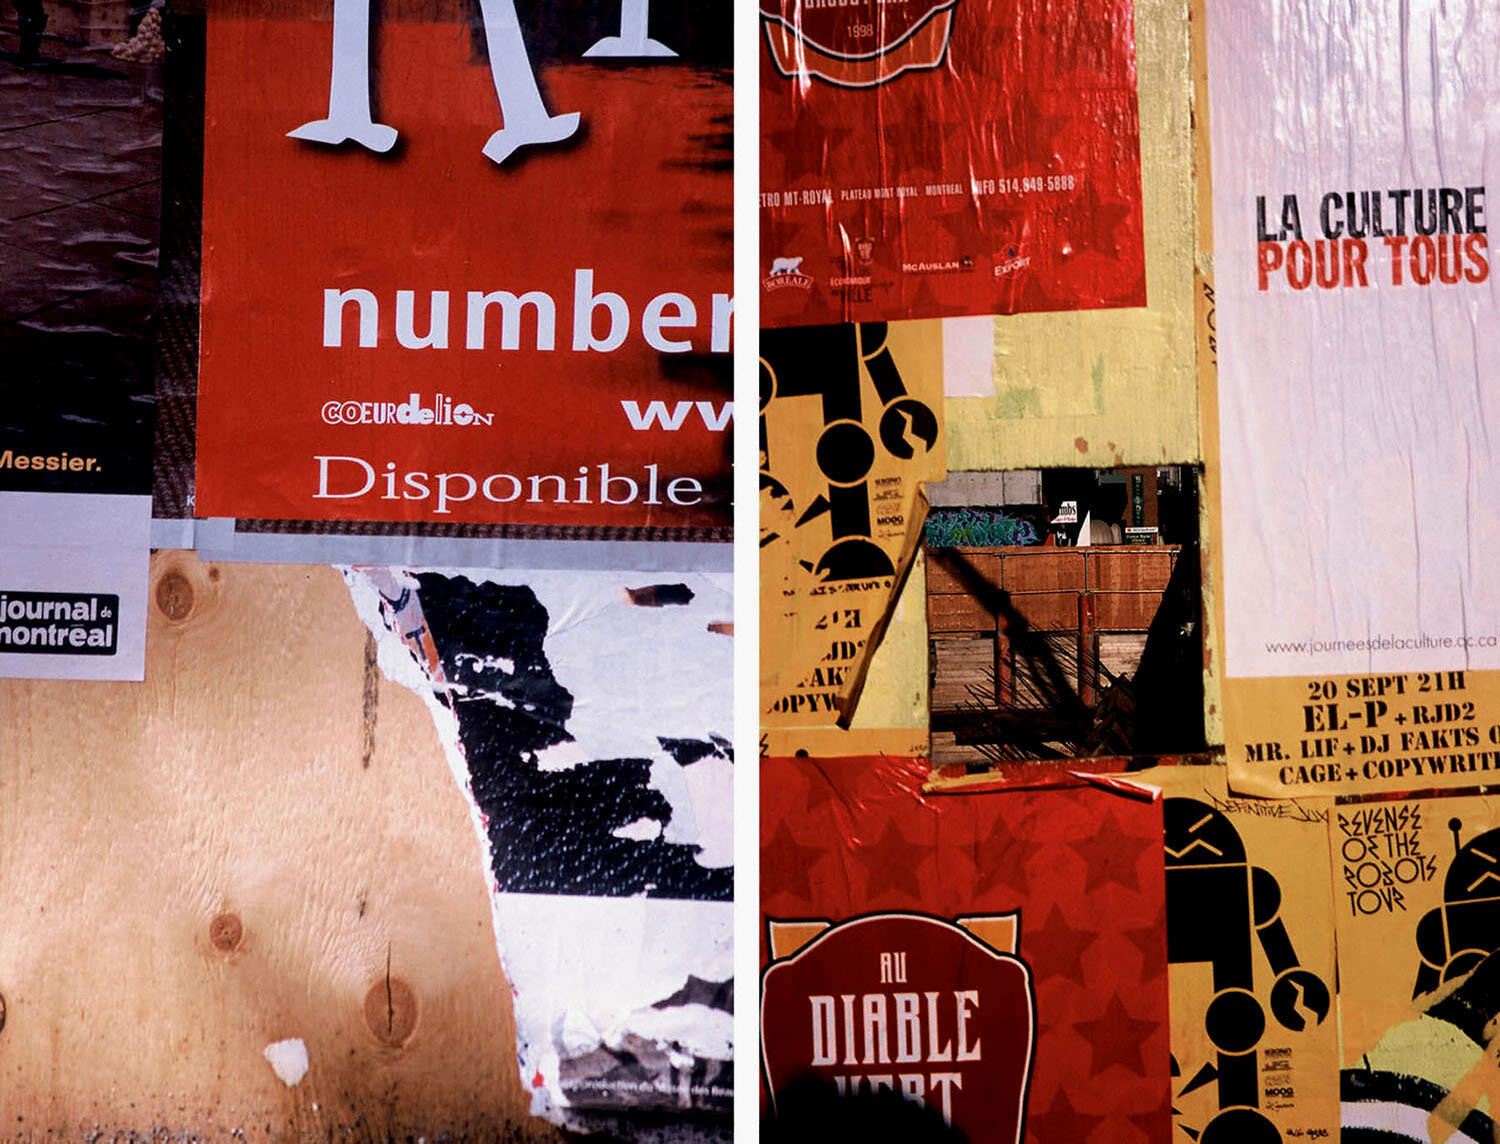 karen_jordan_news_9F_AvailableCulture_Diptych_photo-realistic_abstract_Images_posters_French_text_Montreal_Canada-4web.jpg